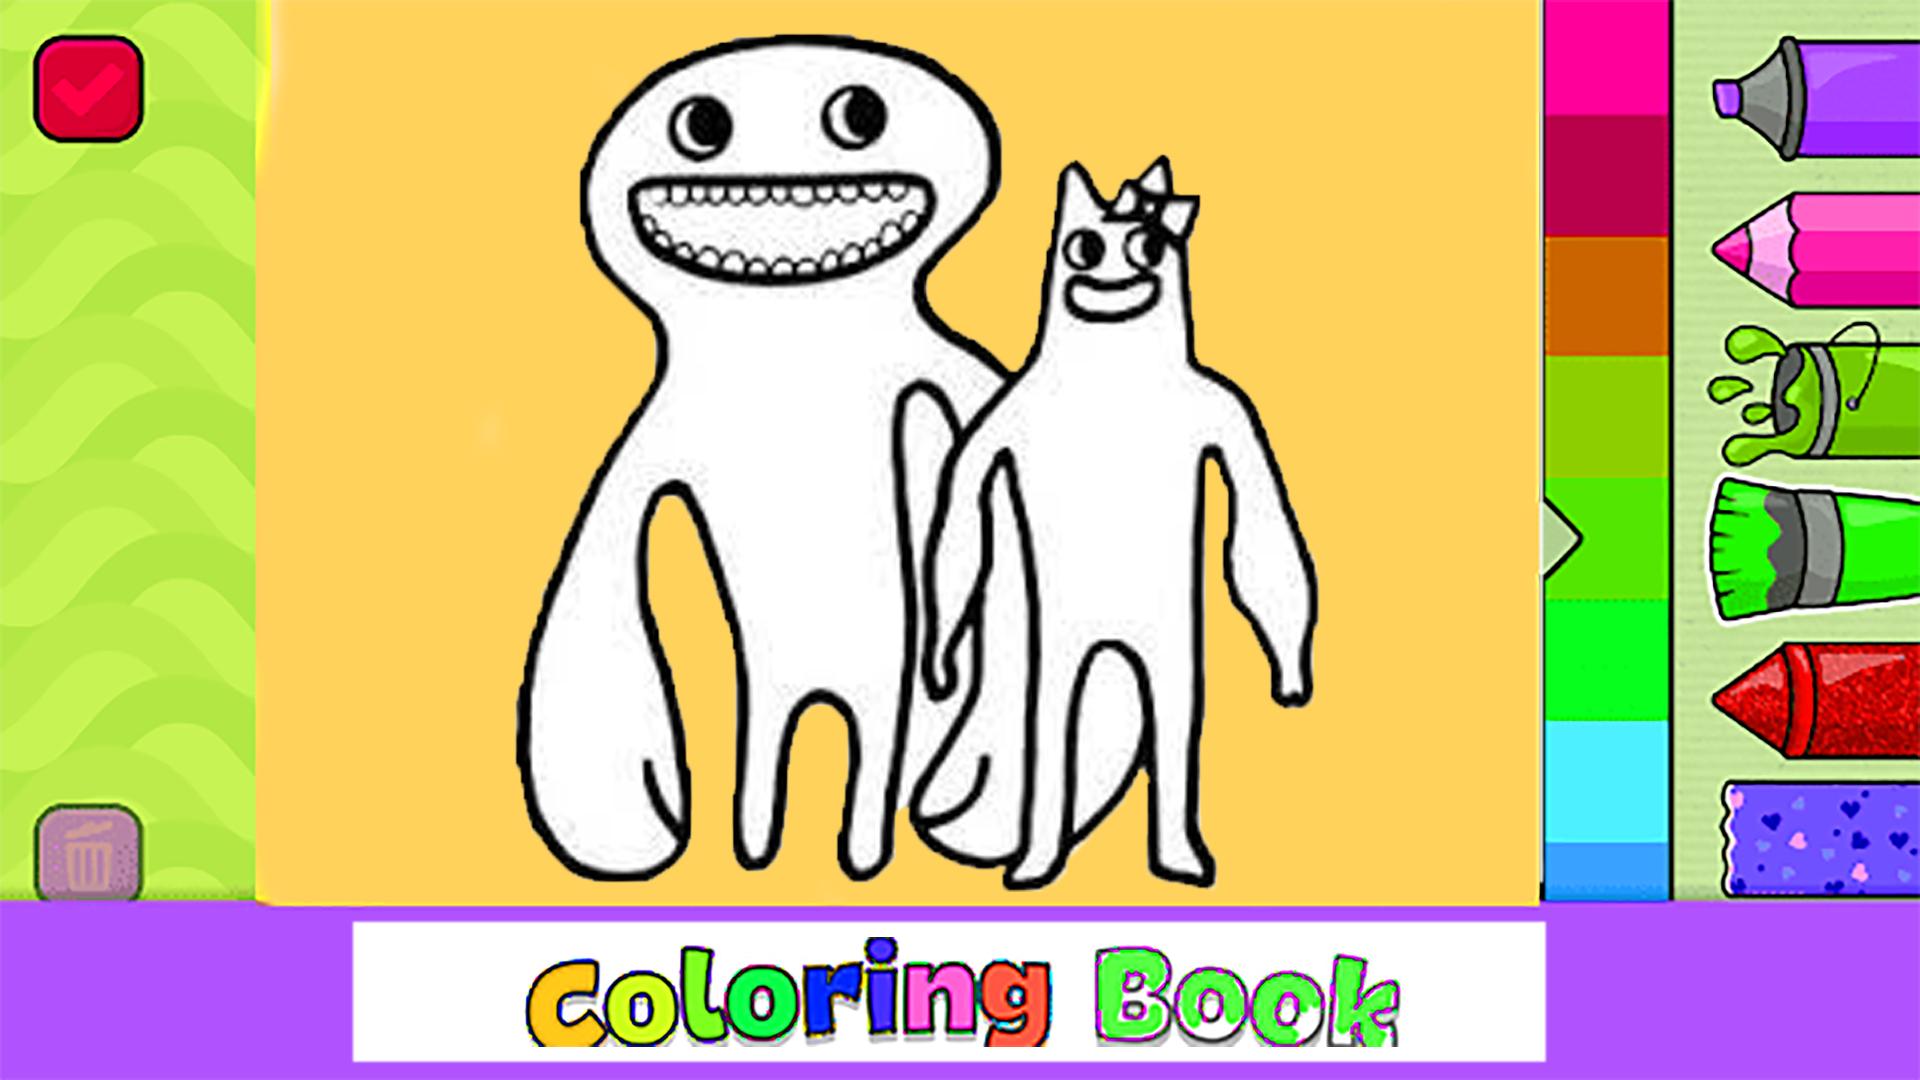 Garten of BanBan 2 Coloring APK for Android Download